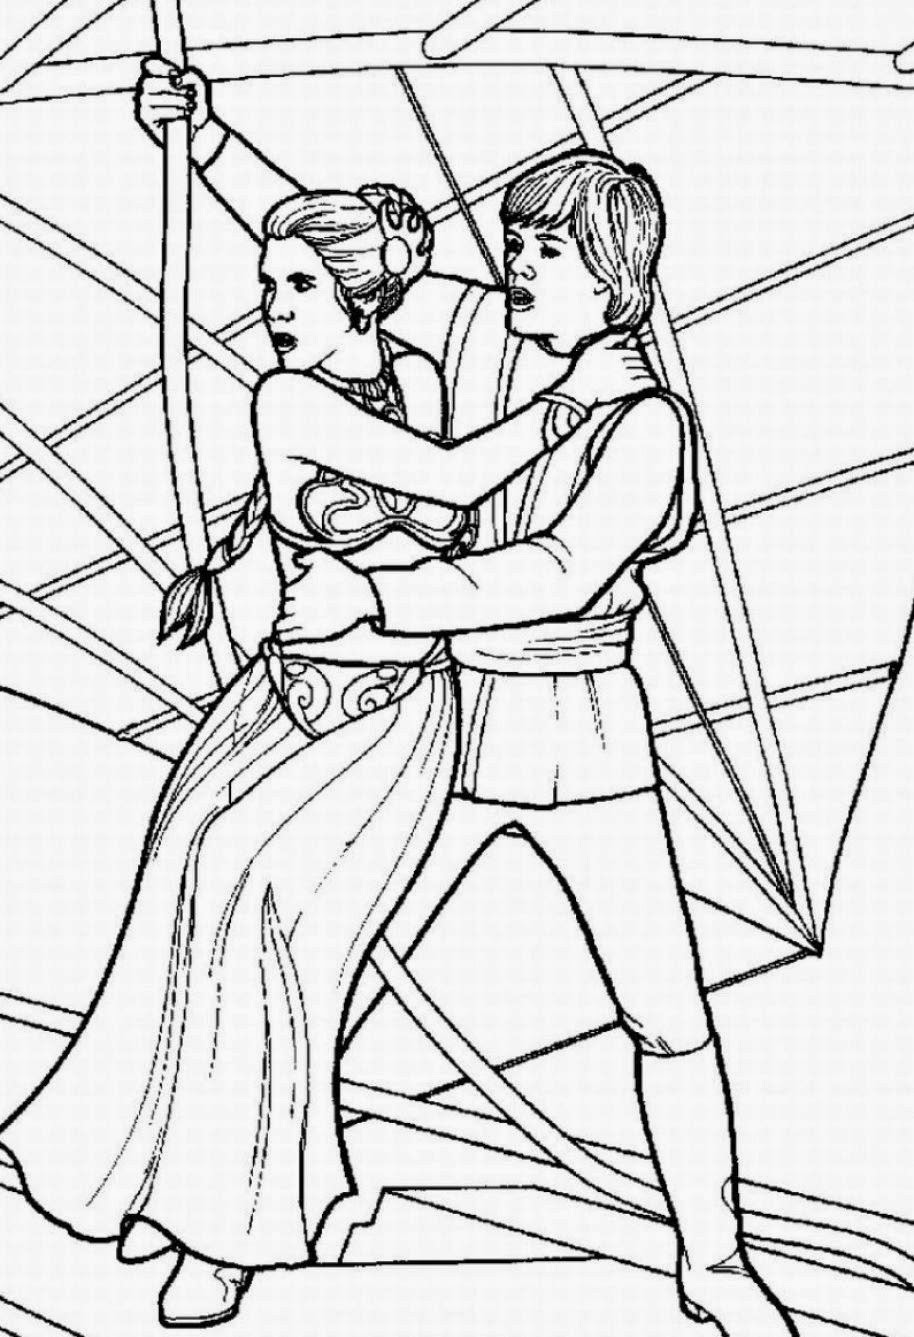 Clone Wars Coloring Pages
 Coloring Pages Star Wars Free Printable Coloring Pages